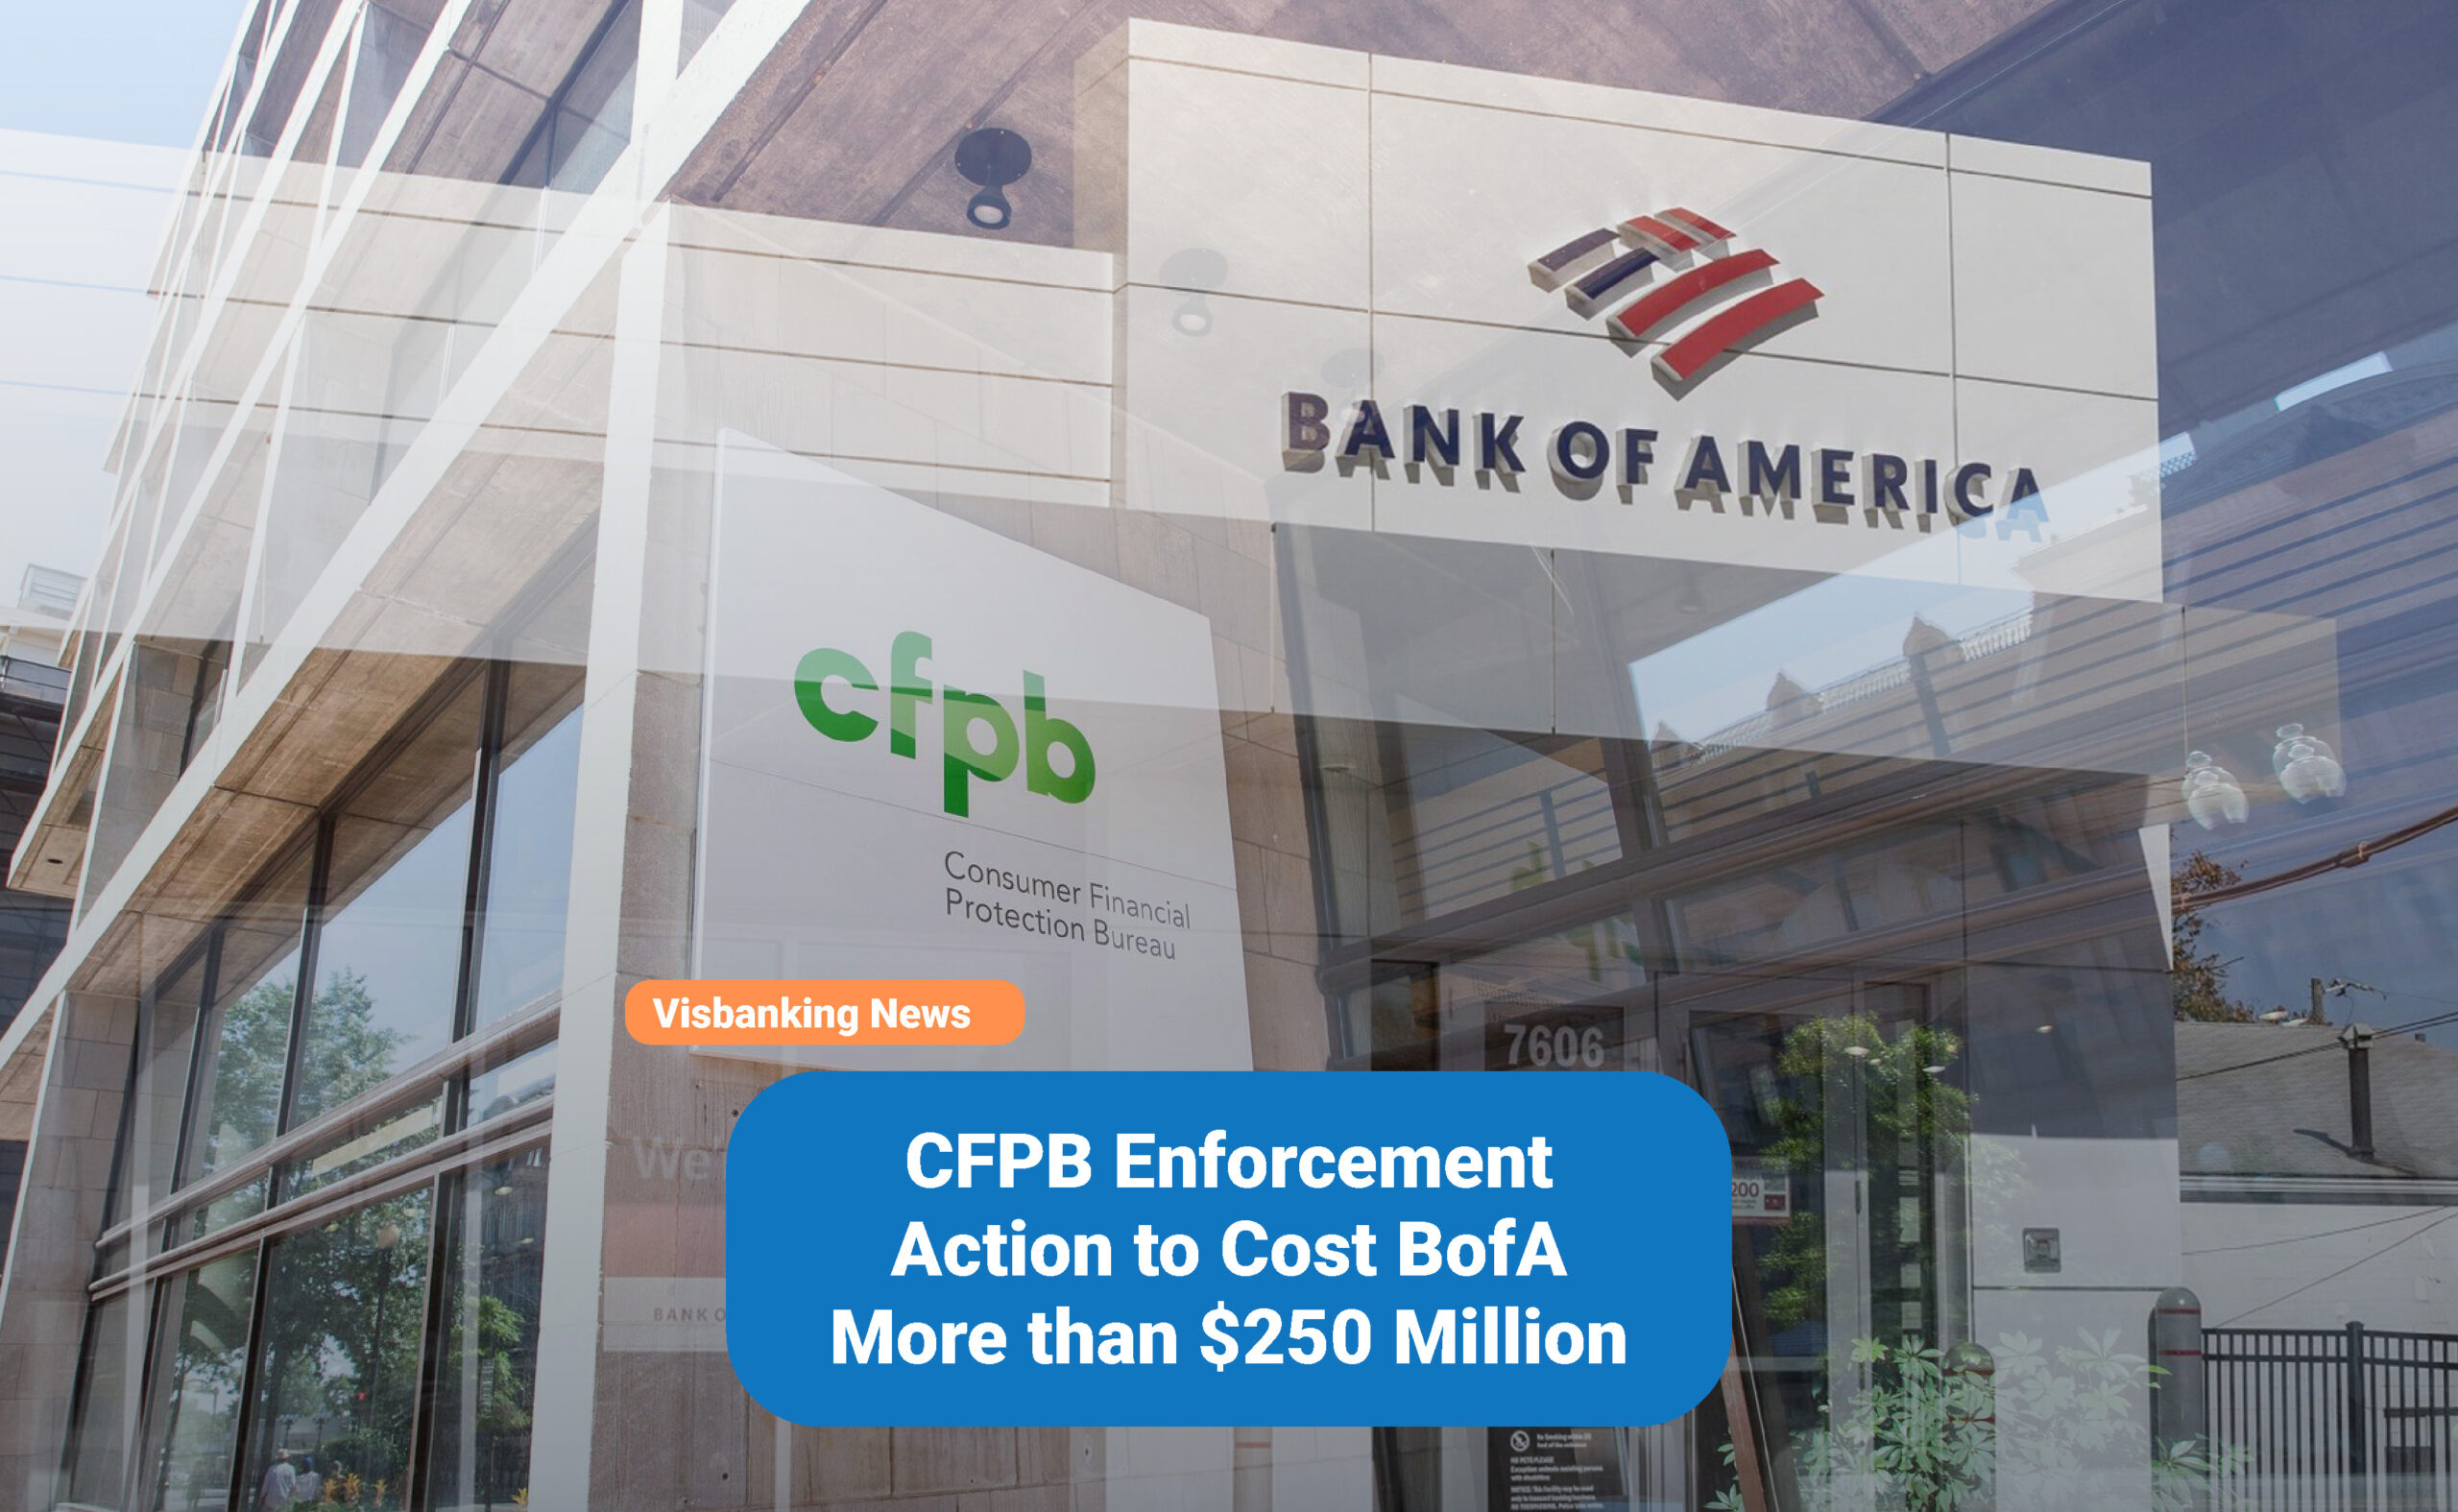 CFPB Enforcement Action to Cost BofA More than $250 Million